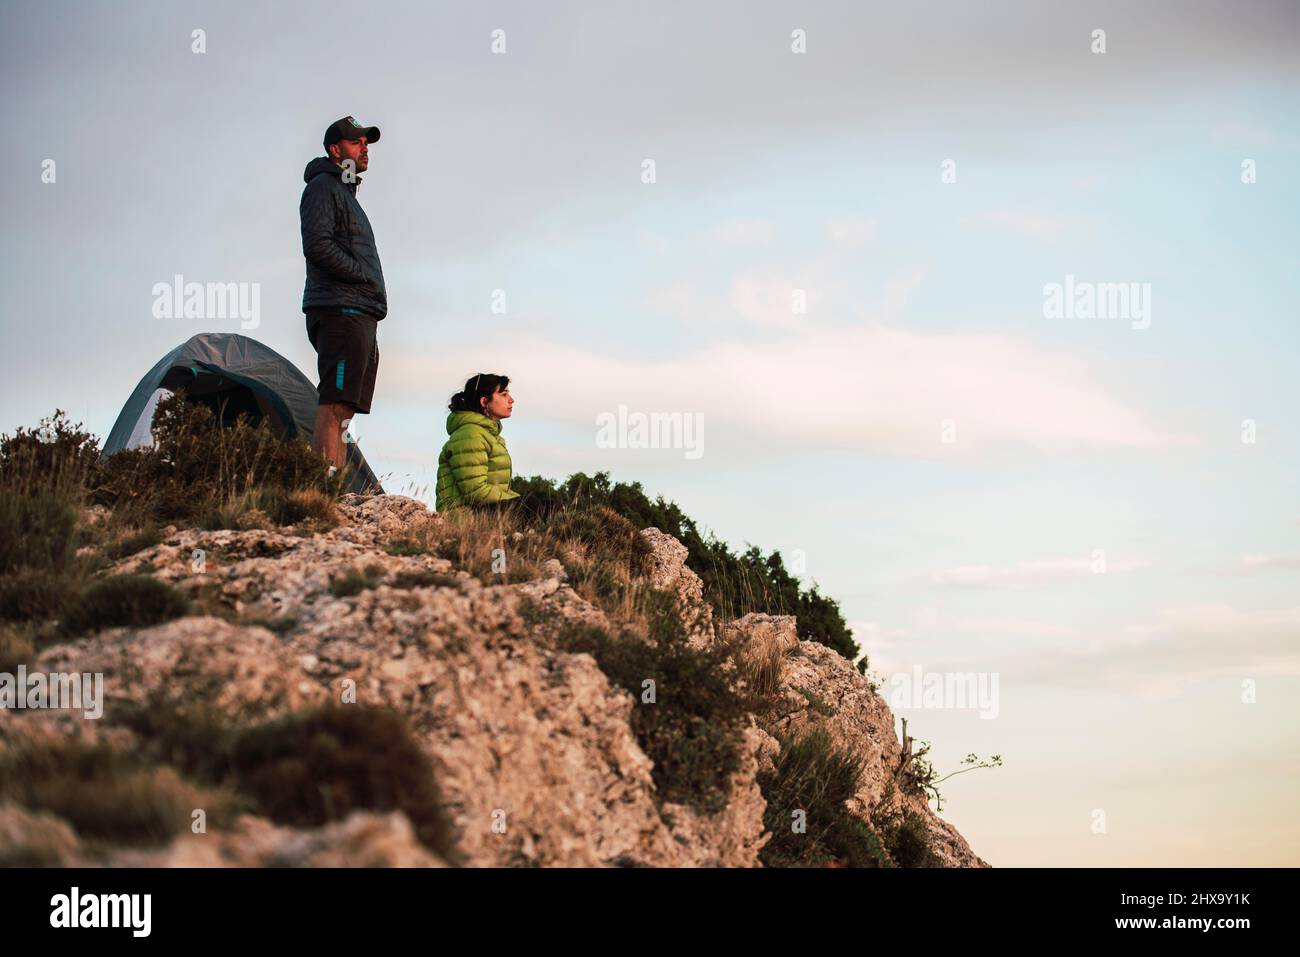 Woman and man sitting on the cliff looking out over the landscape. Stock Photo